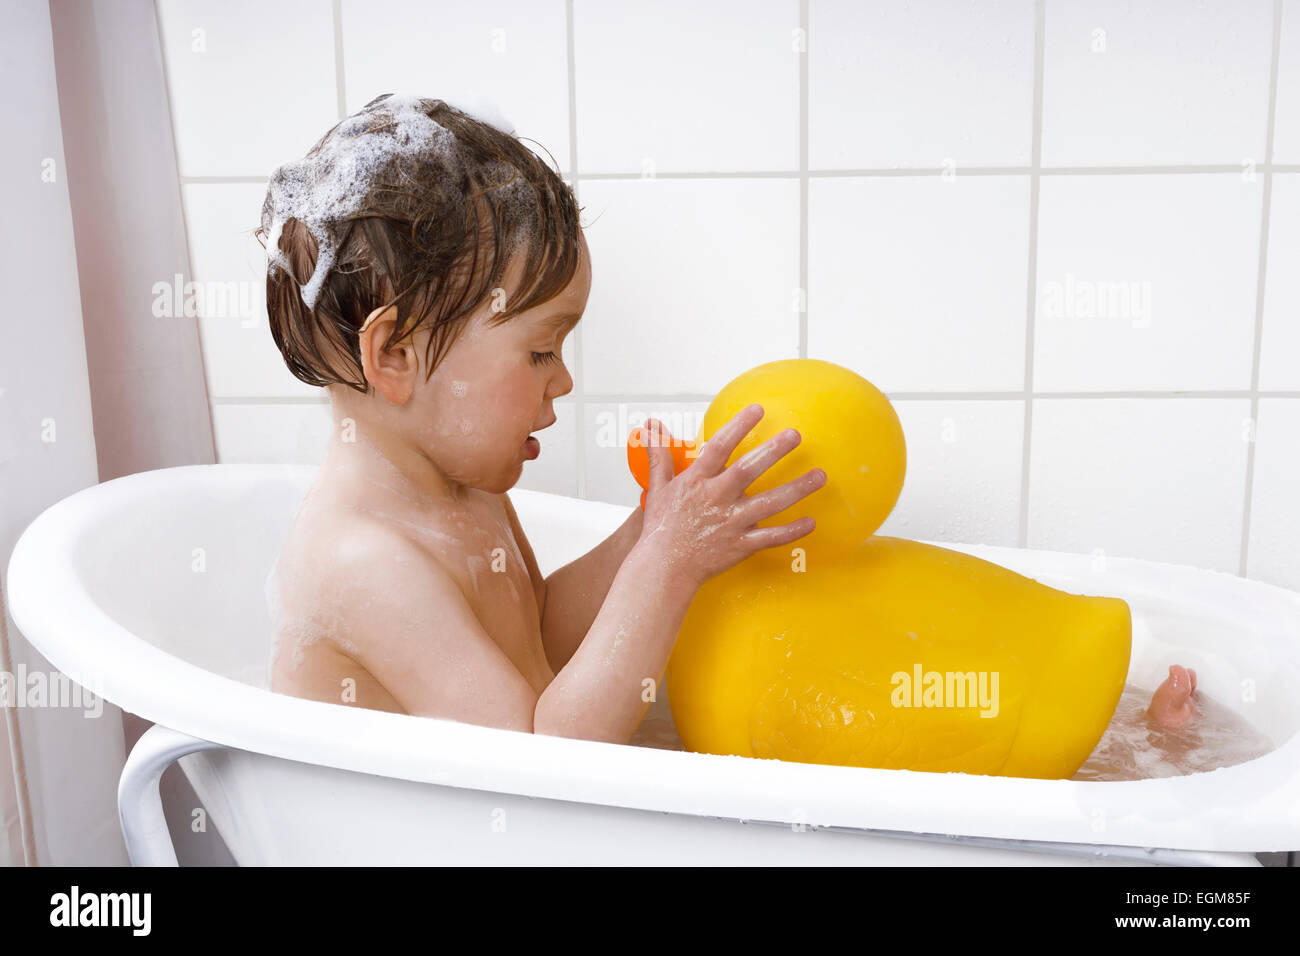 adorable little boy washing his rubber duck Stock Photo